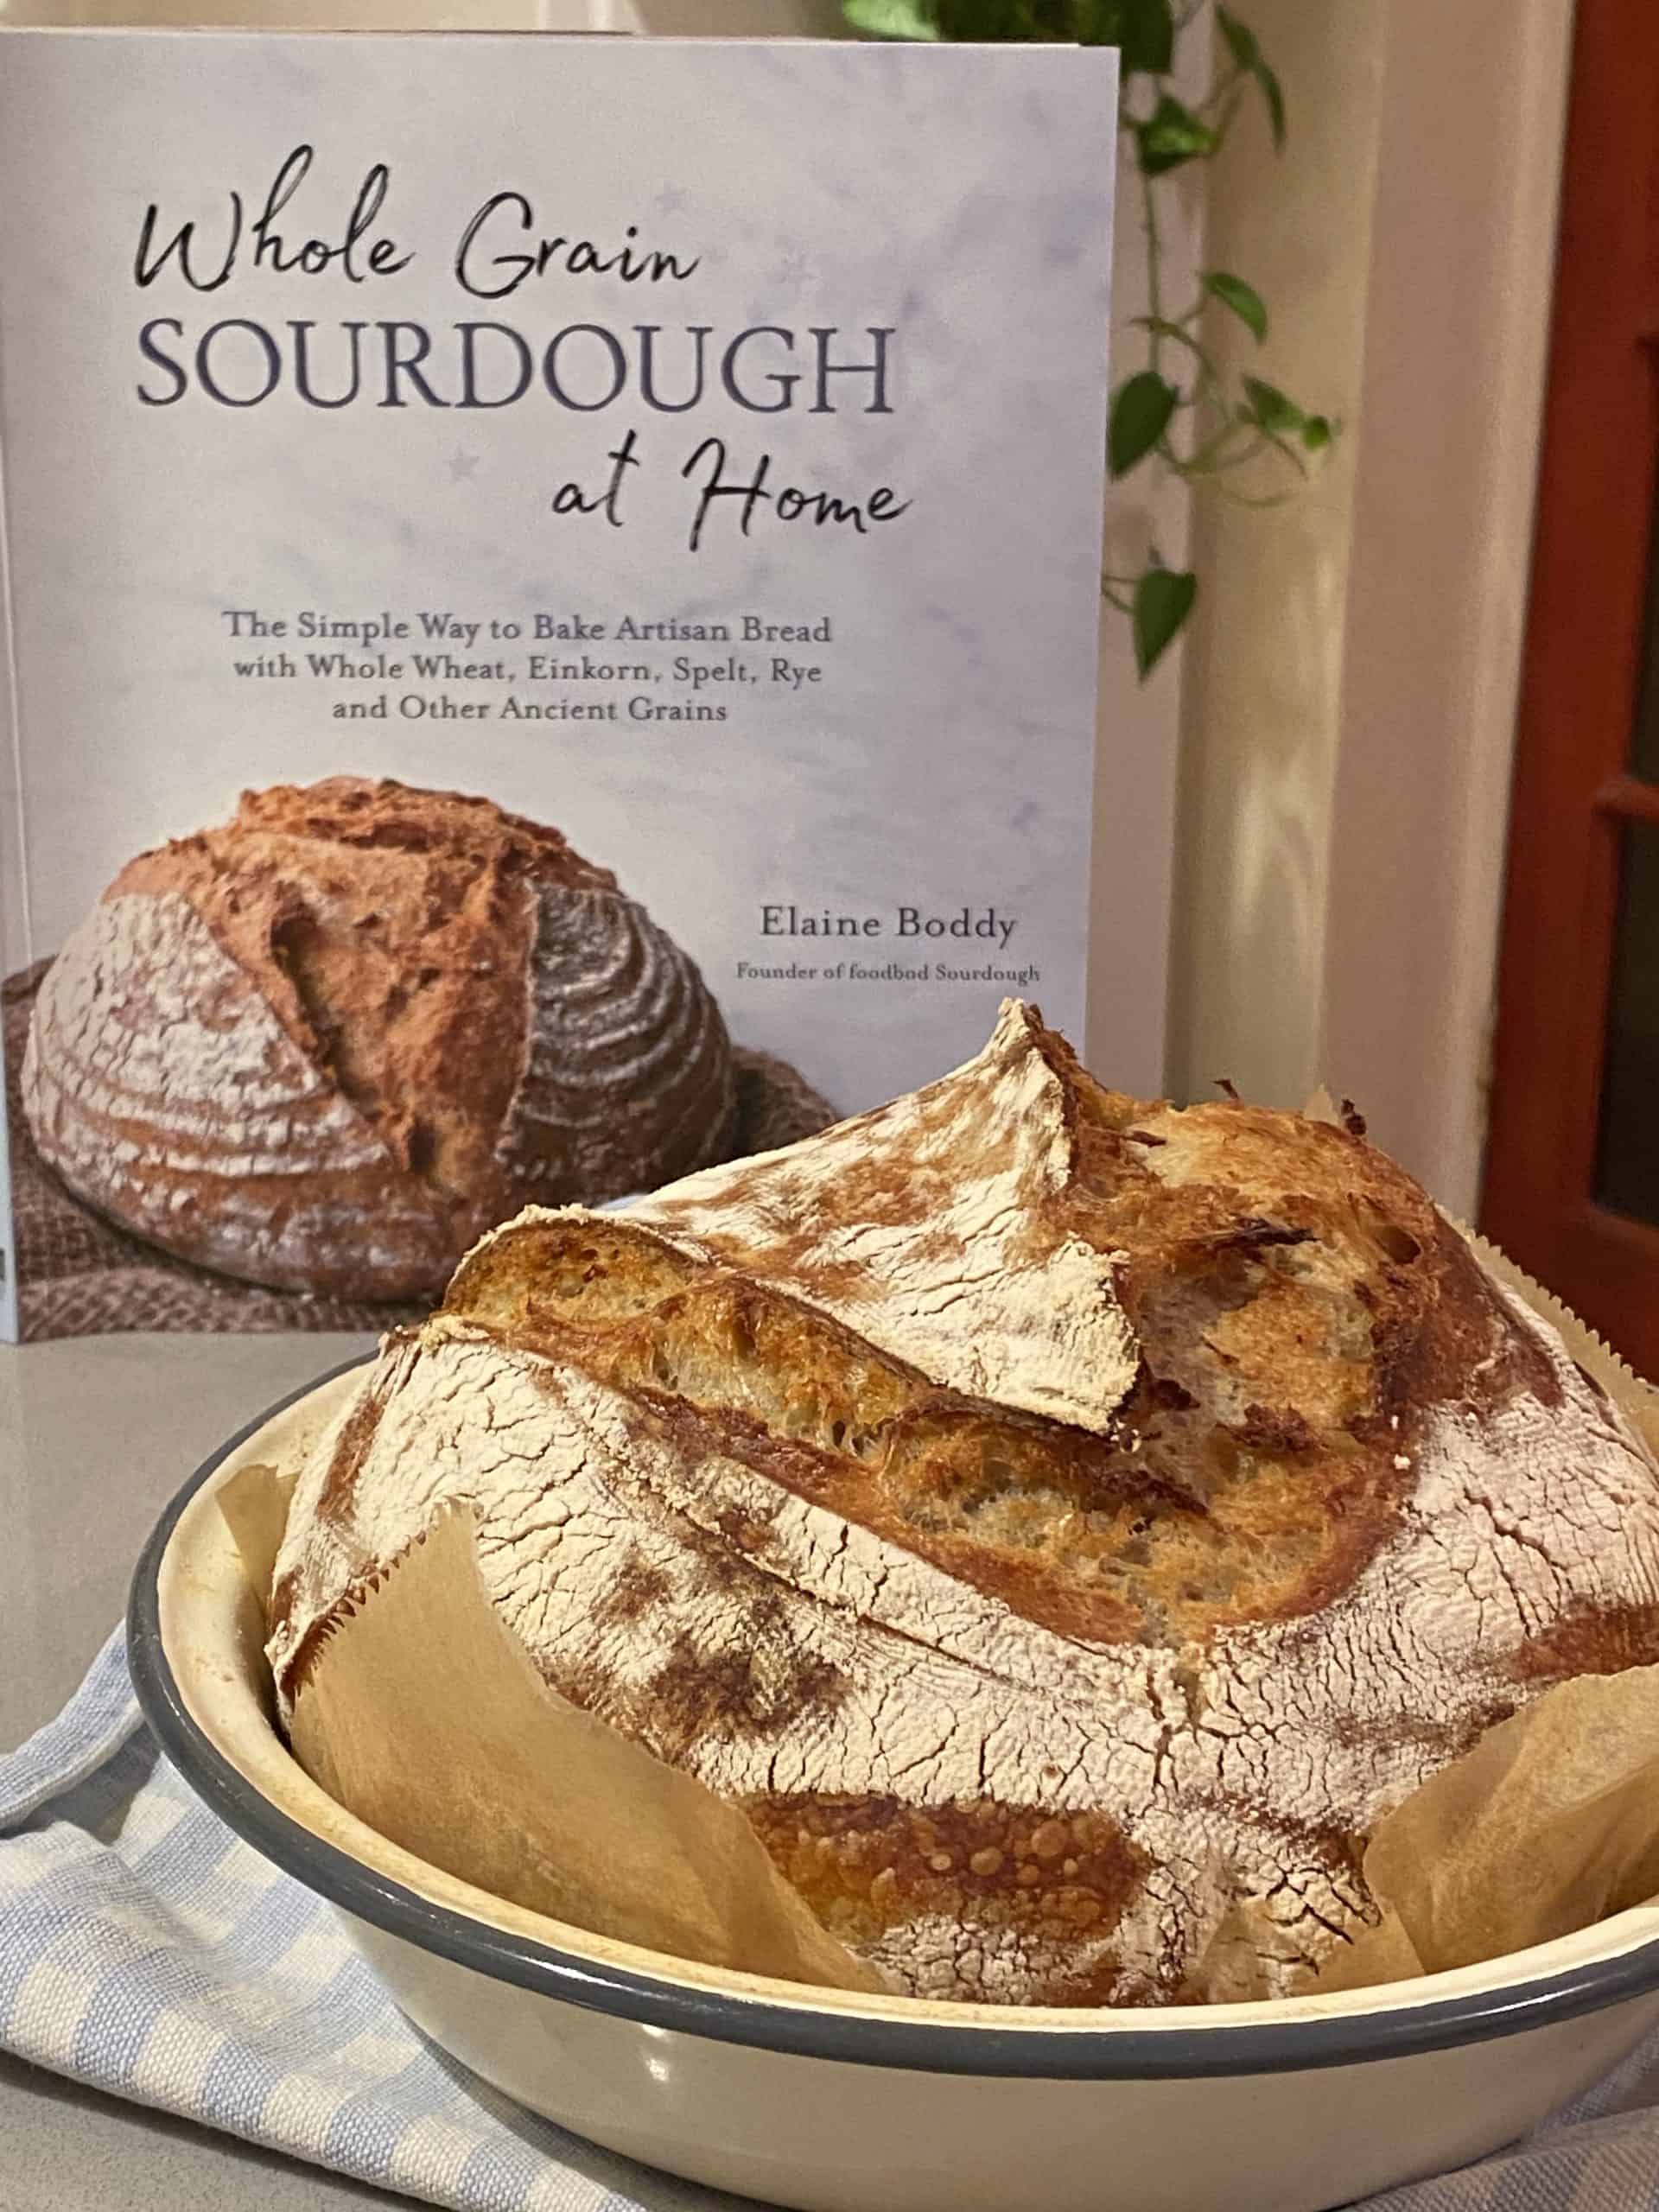 Cookbook with sourdough loaf in front of it.